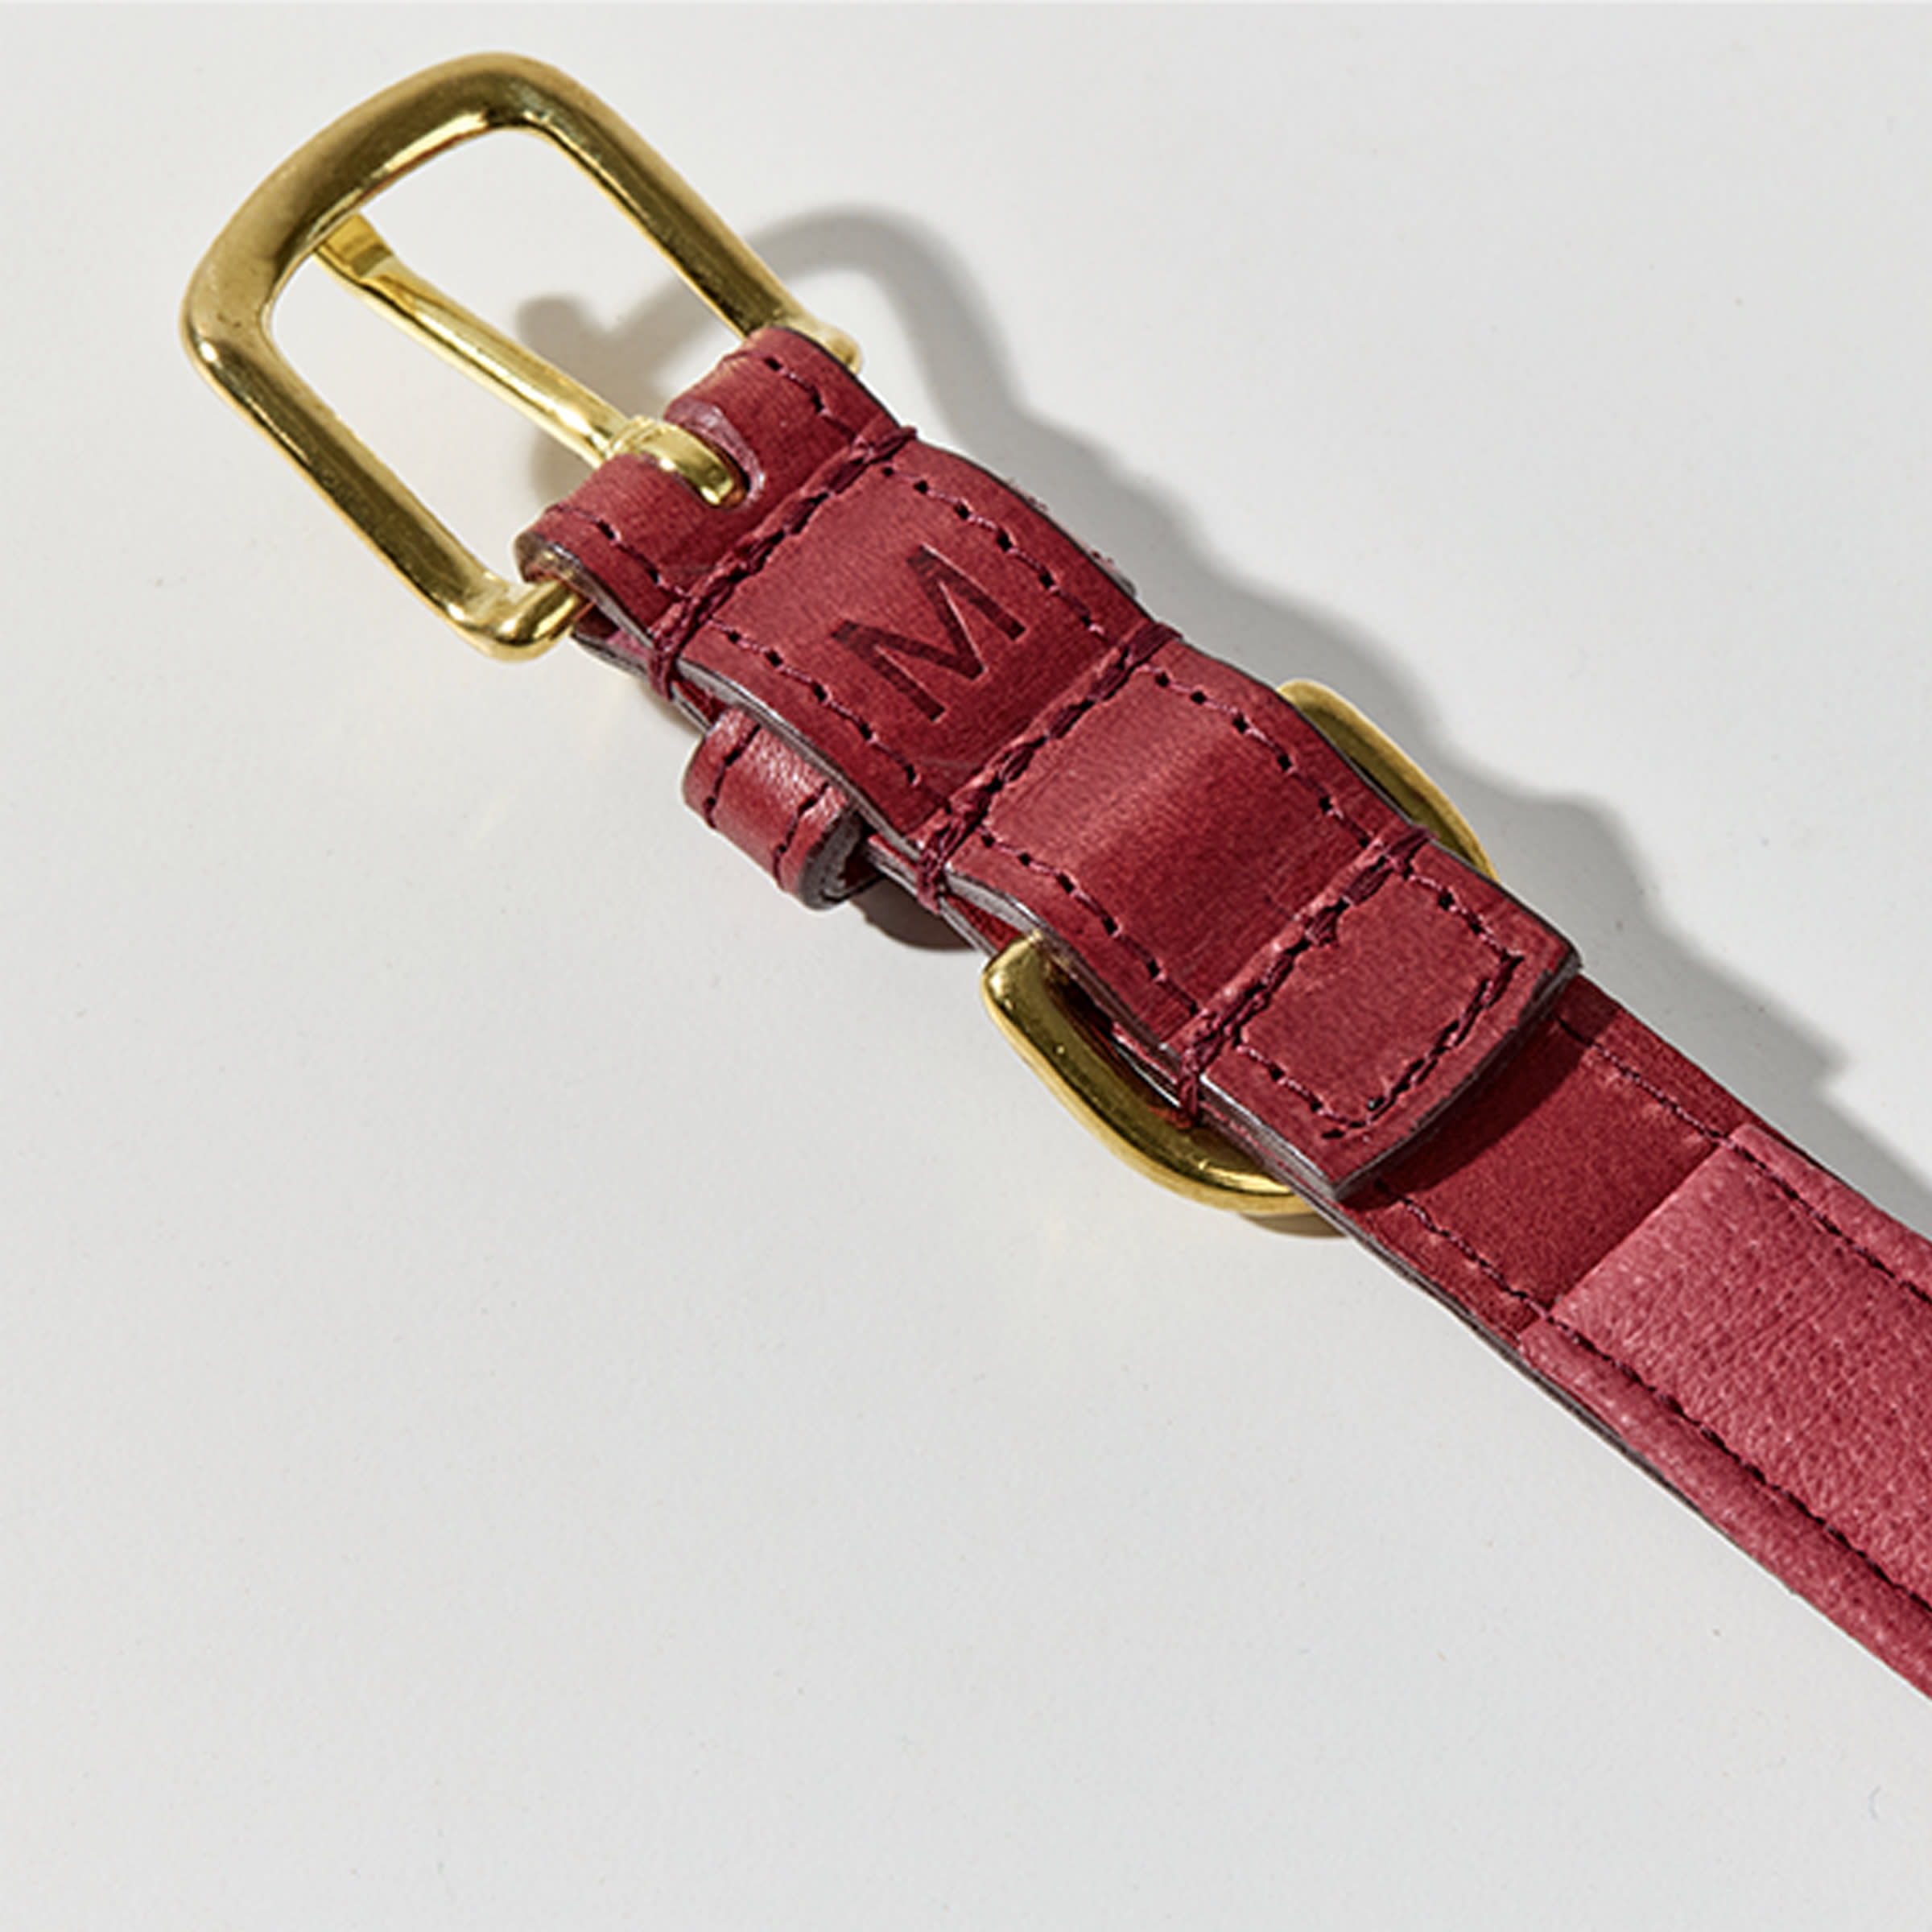 Padded Leather Dog Collar (Red)